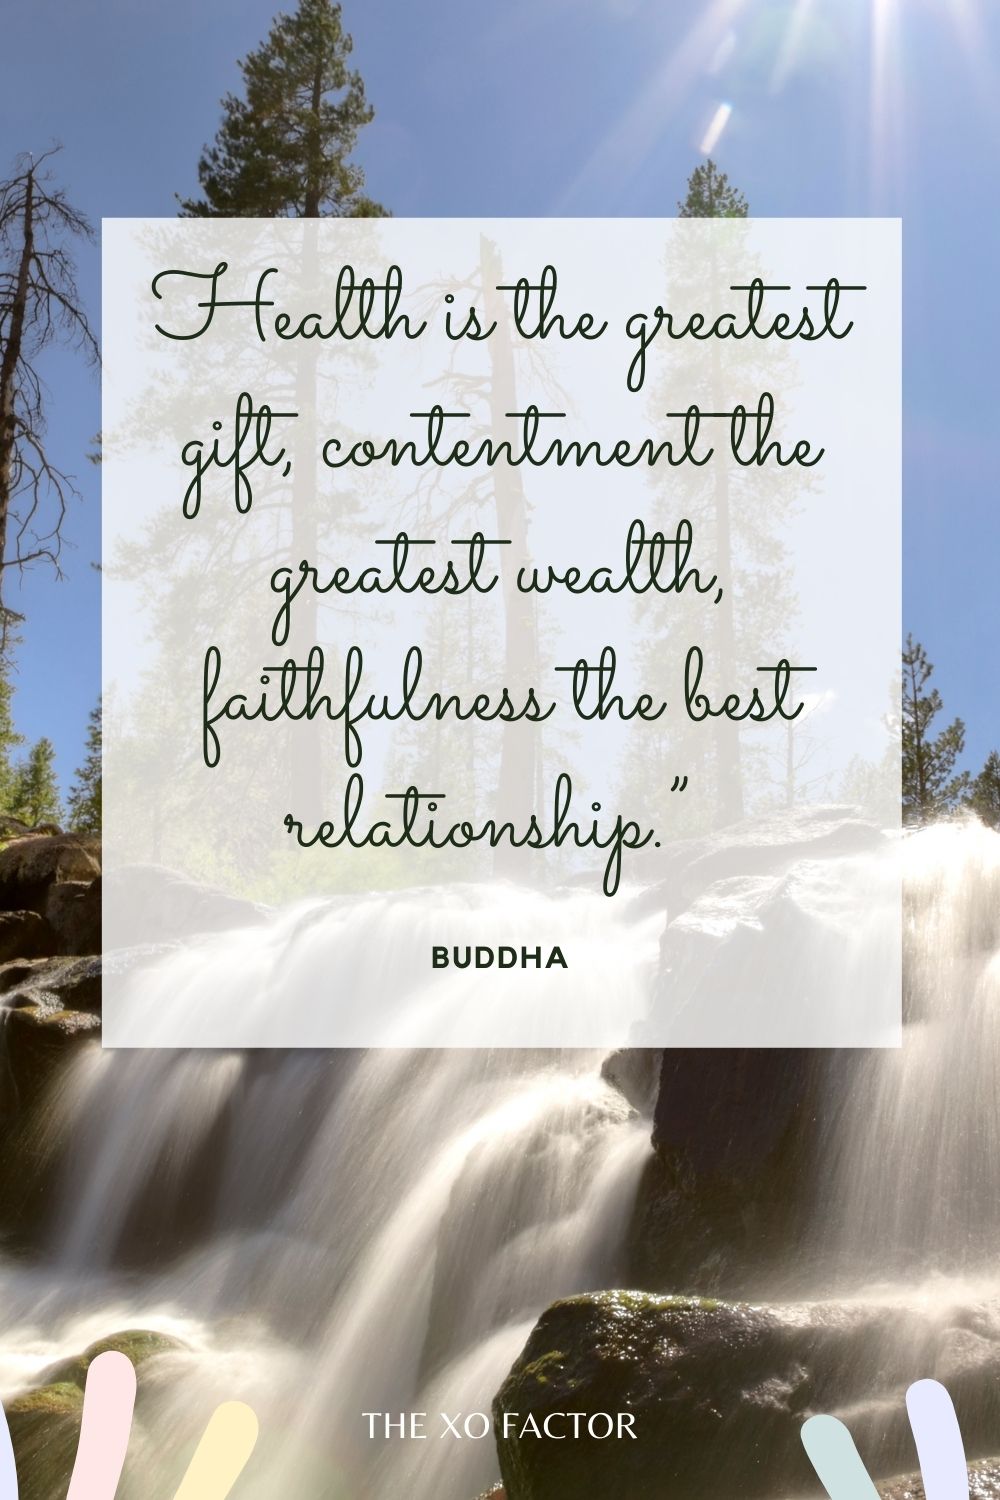 Health is the greatest gift, contentment the greatest wealth, faithfulness the best relationship.”  Buddha